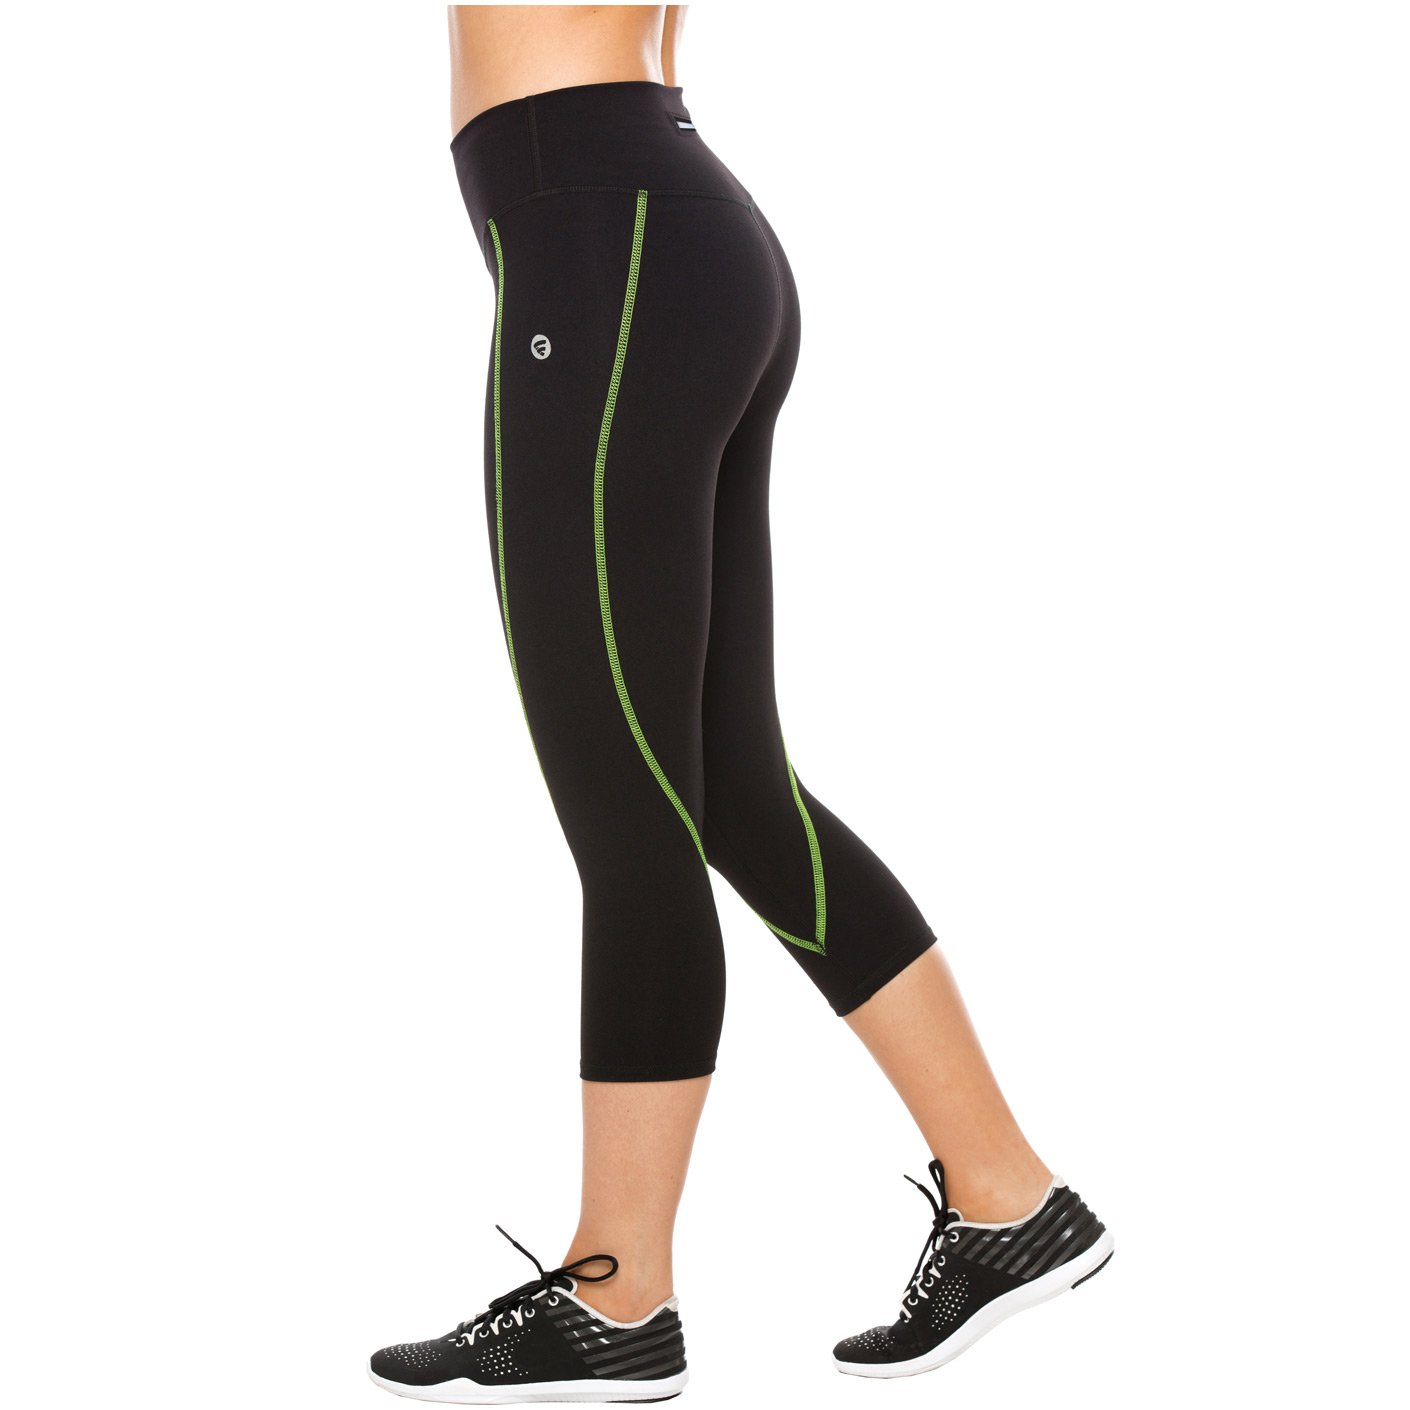 FLEXMEE Activewear: 946069 - Mid Rise Leggings With Pockets